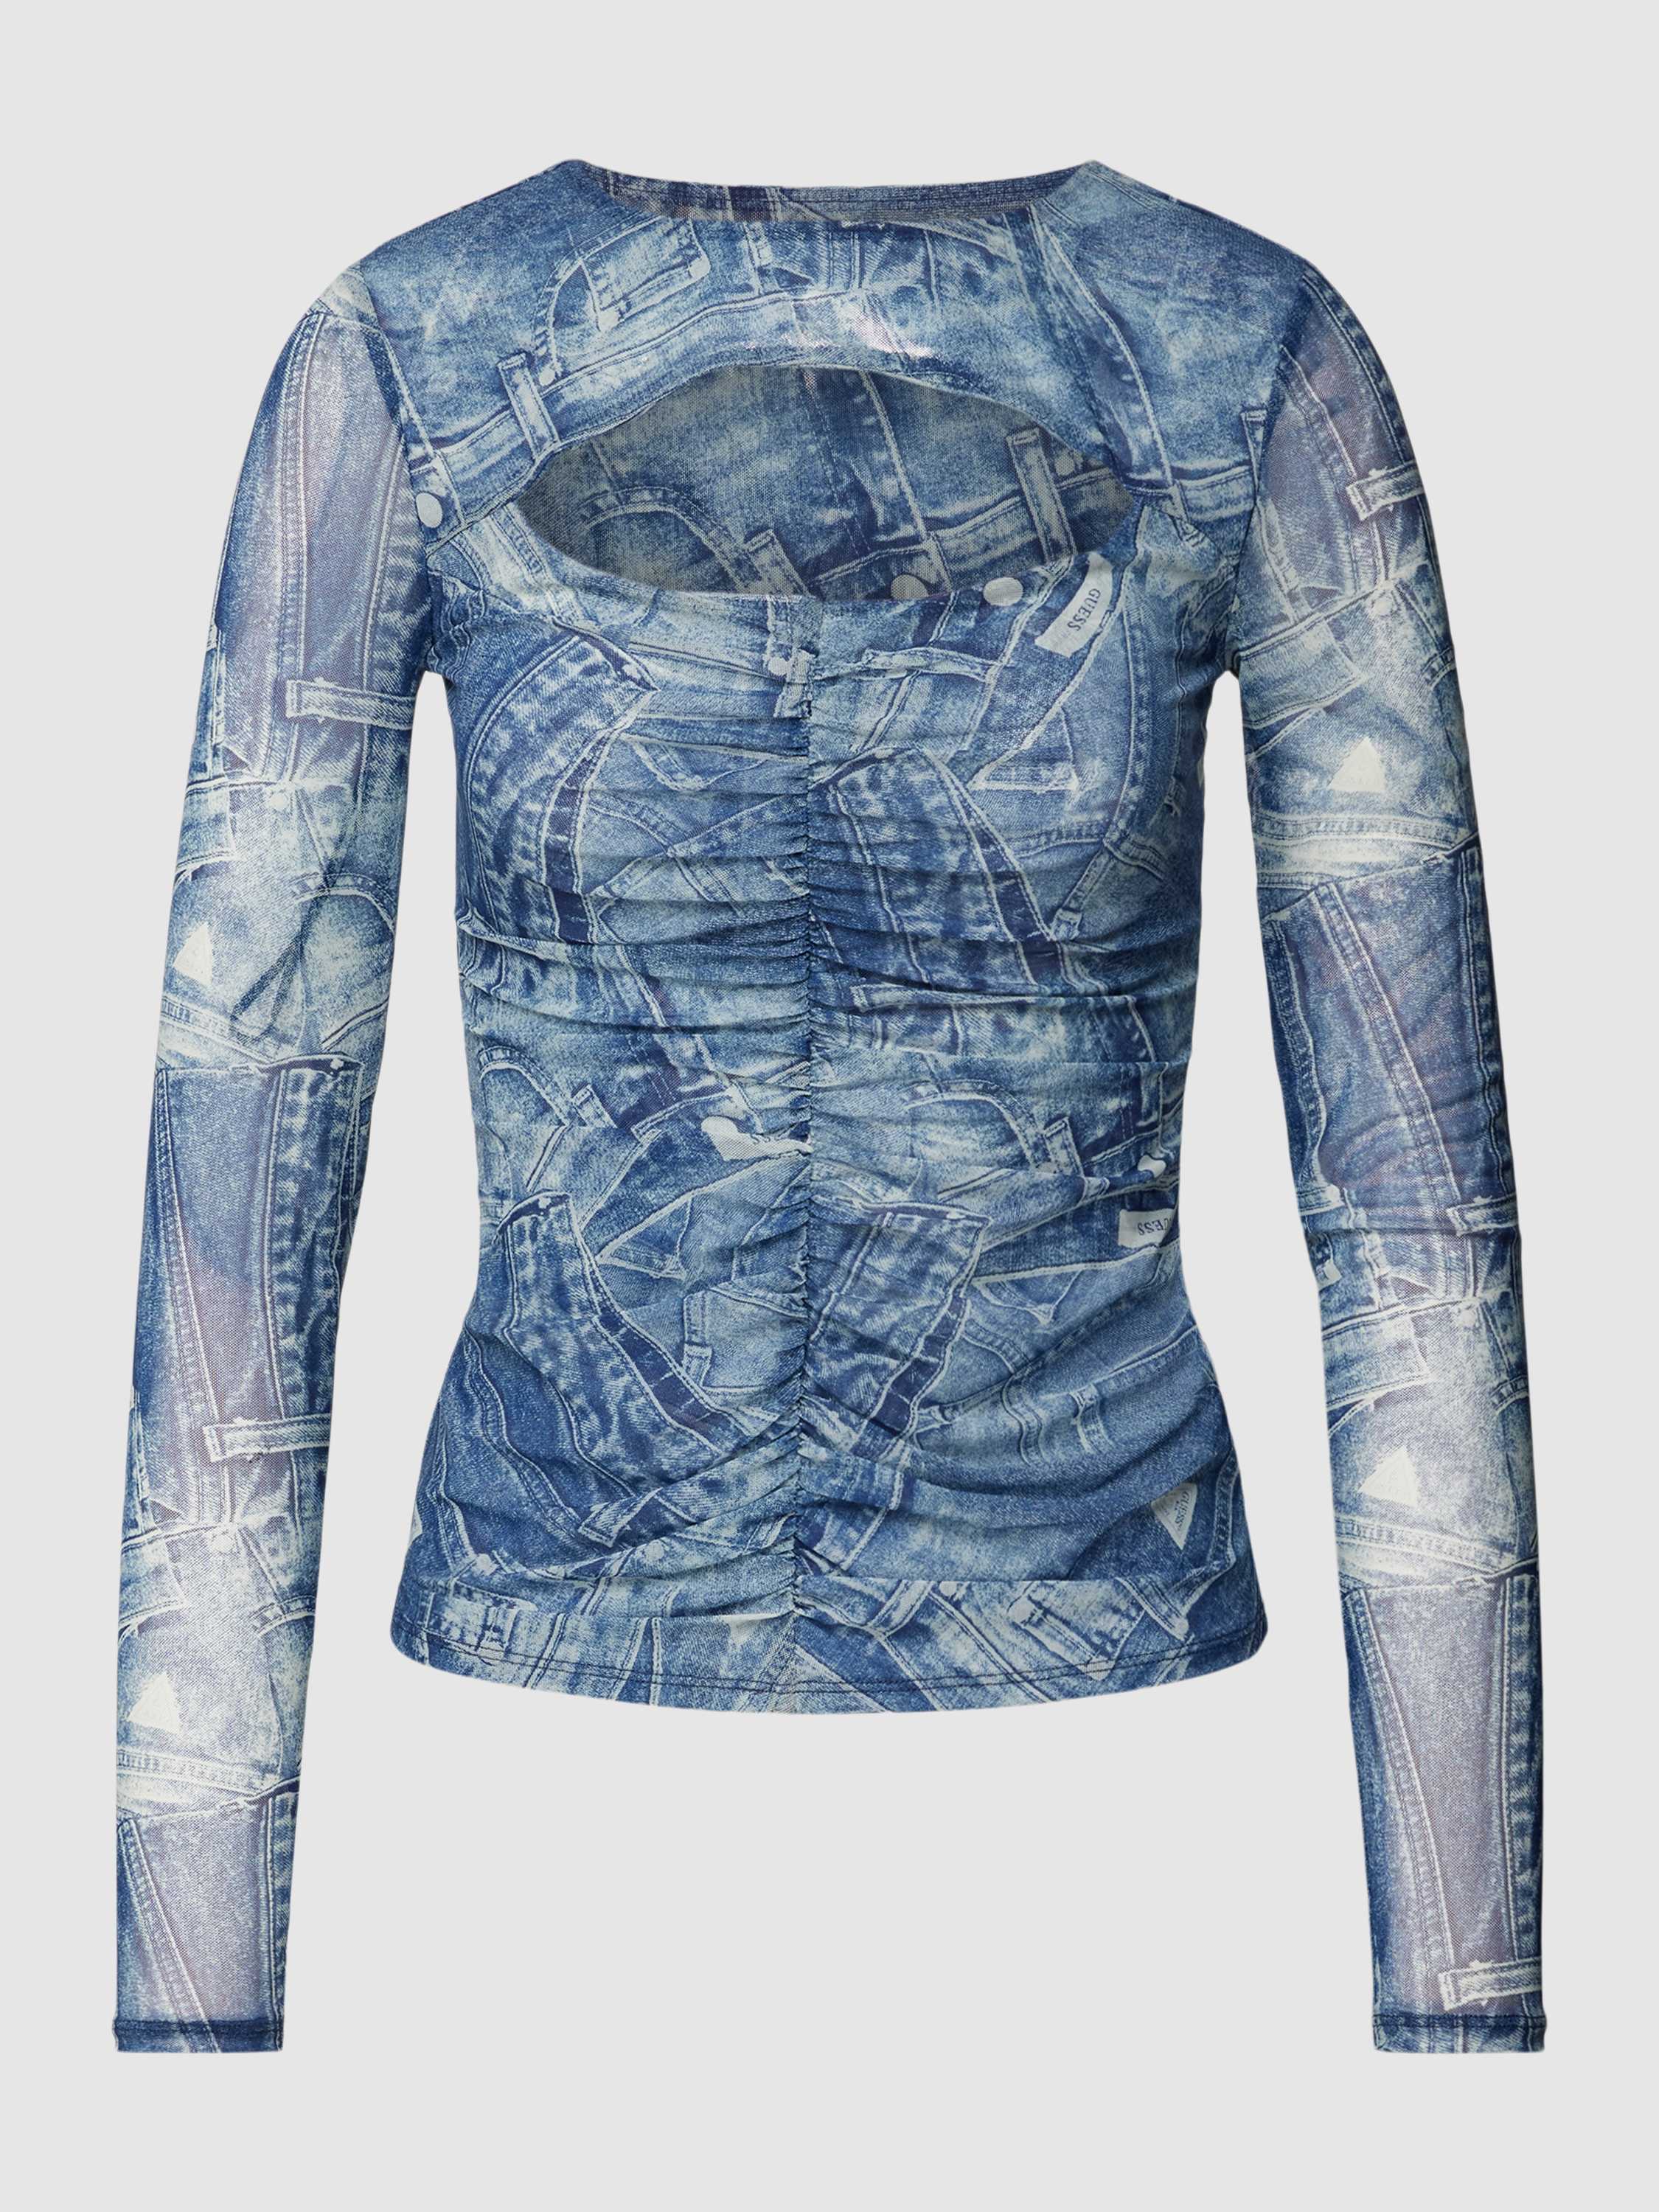 Longsleeve mit Cut Out Modell 'BRIENNA'